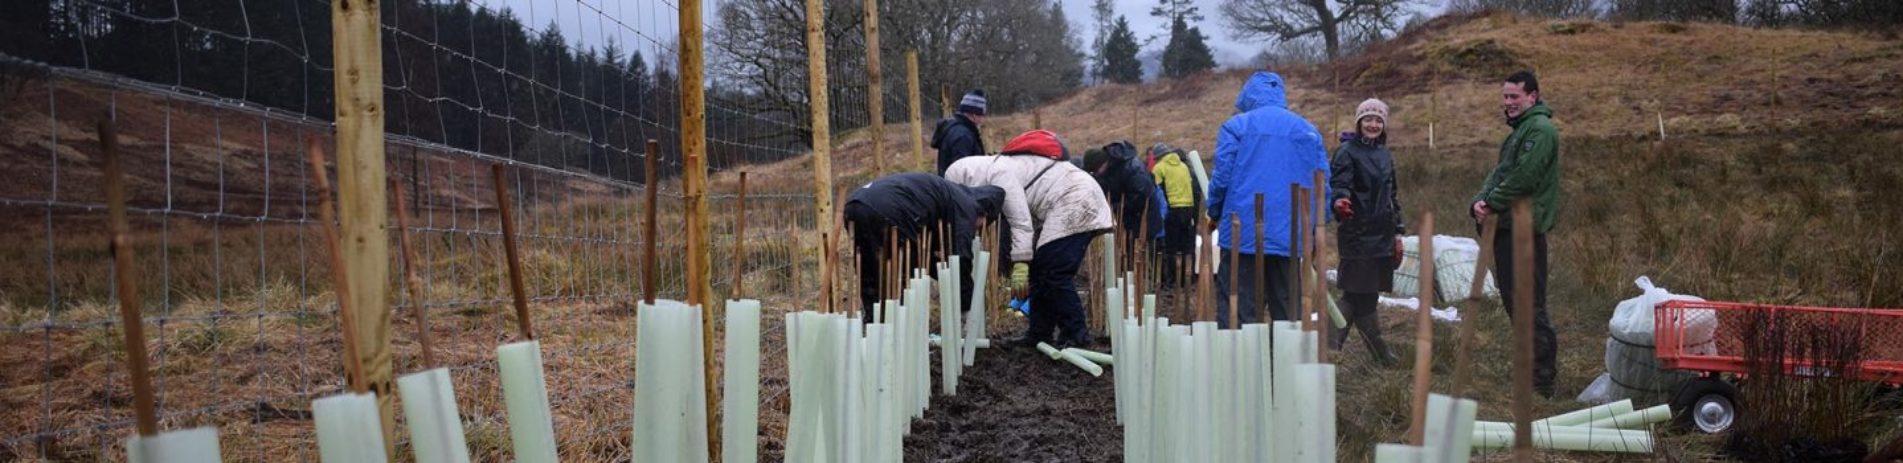 young-students-teacher-and-national-park-staff-planting-trees-each-having-tree-guard-on-alongside-deer-face-wet-dark-day-loch-achray-farm